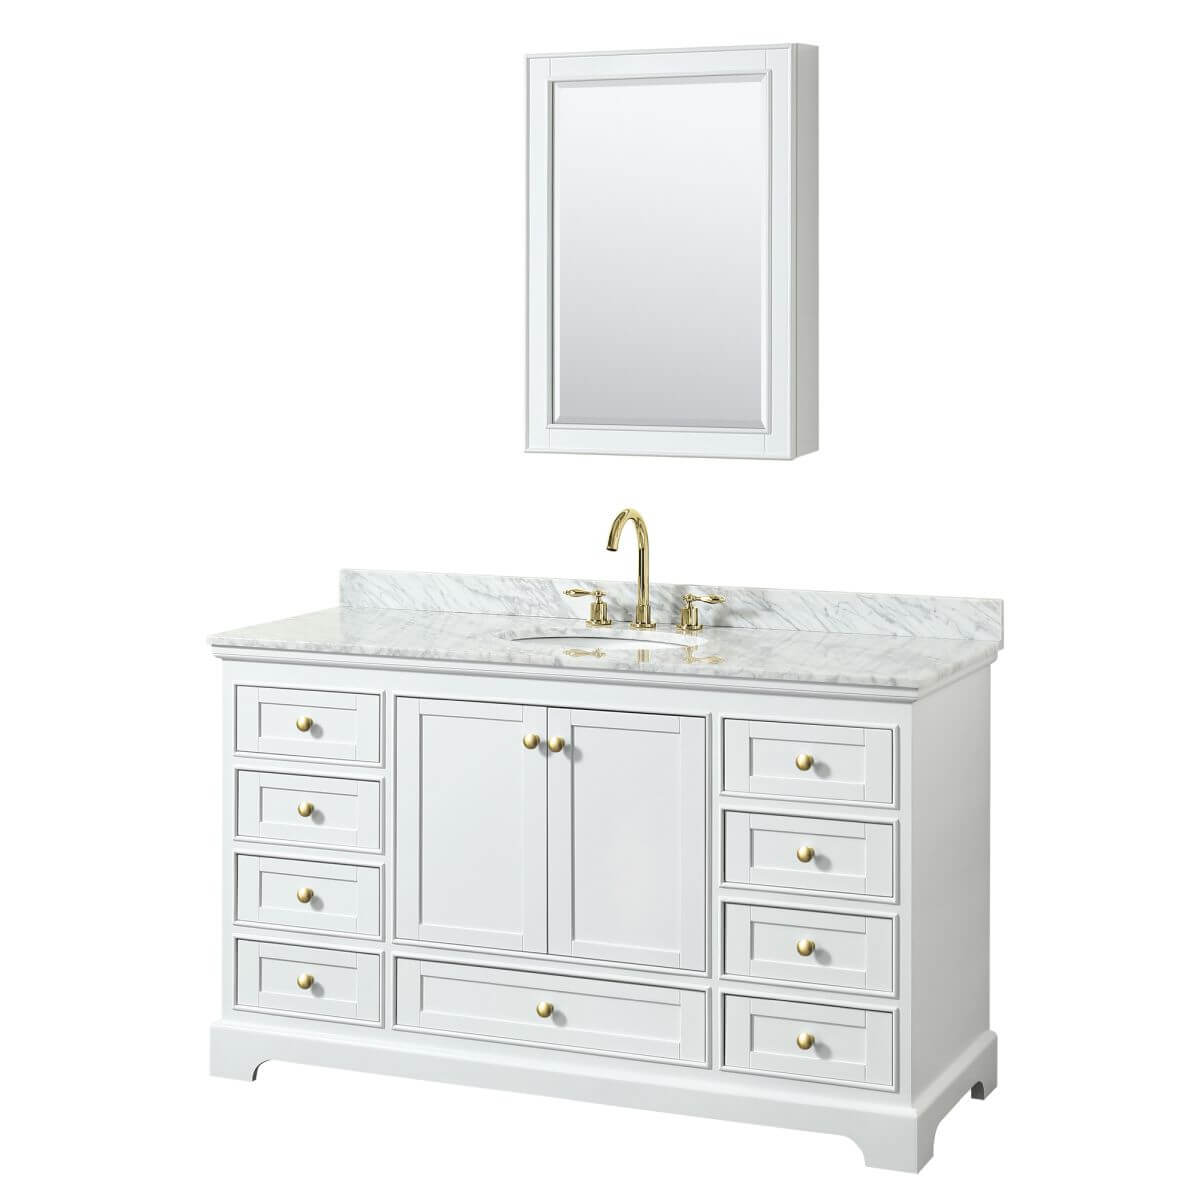 Wyndham Collection Deborah 60 inch Single Bathroom Vanity in White with White Carrara Marble Countertop, Undermount Oval Sink, Brushed Gold Trim and Medicine Cabinet - WCS202060SWGCMUNOMED